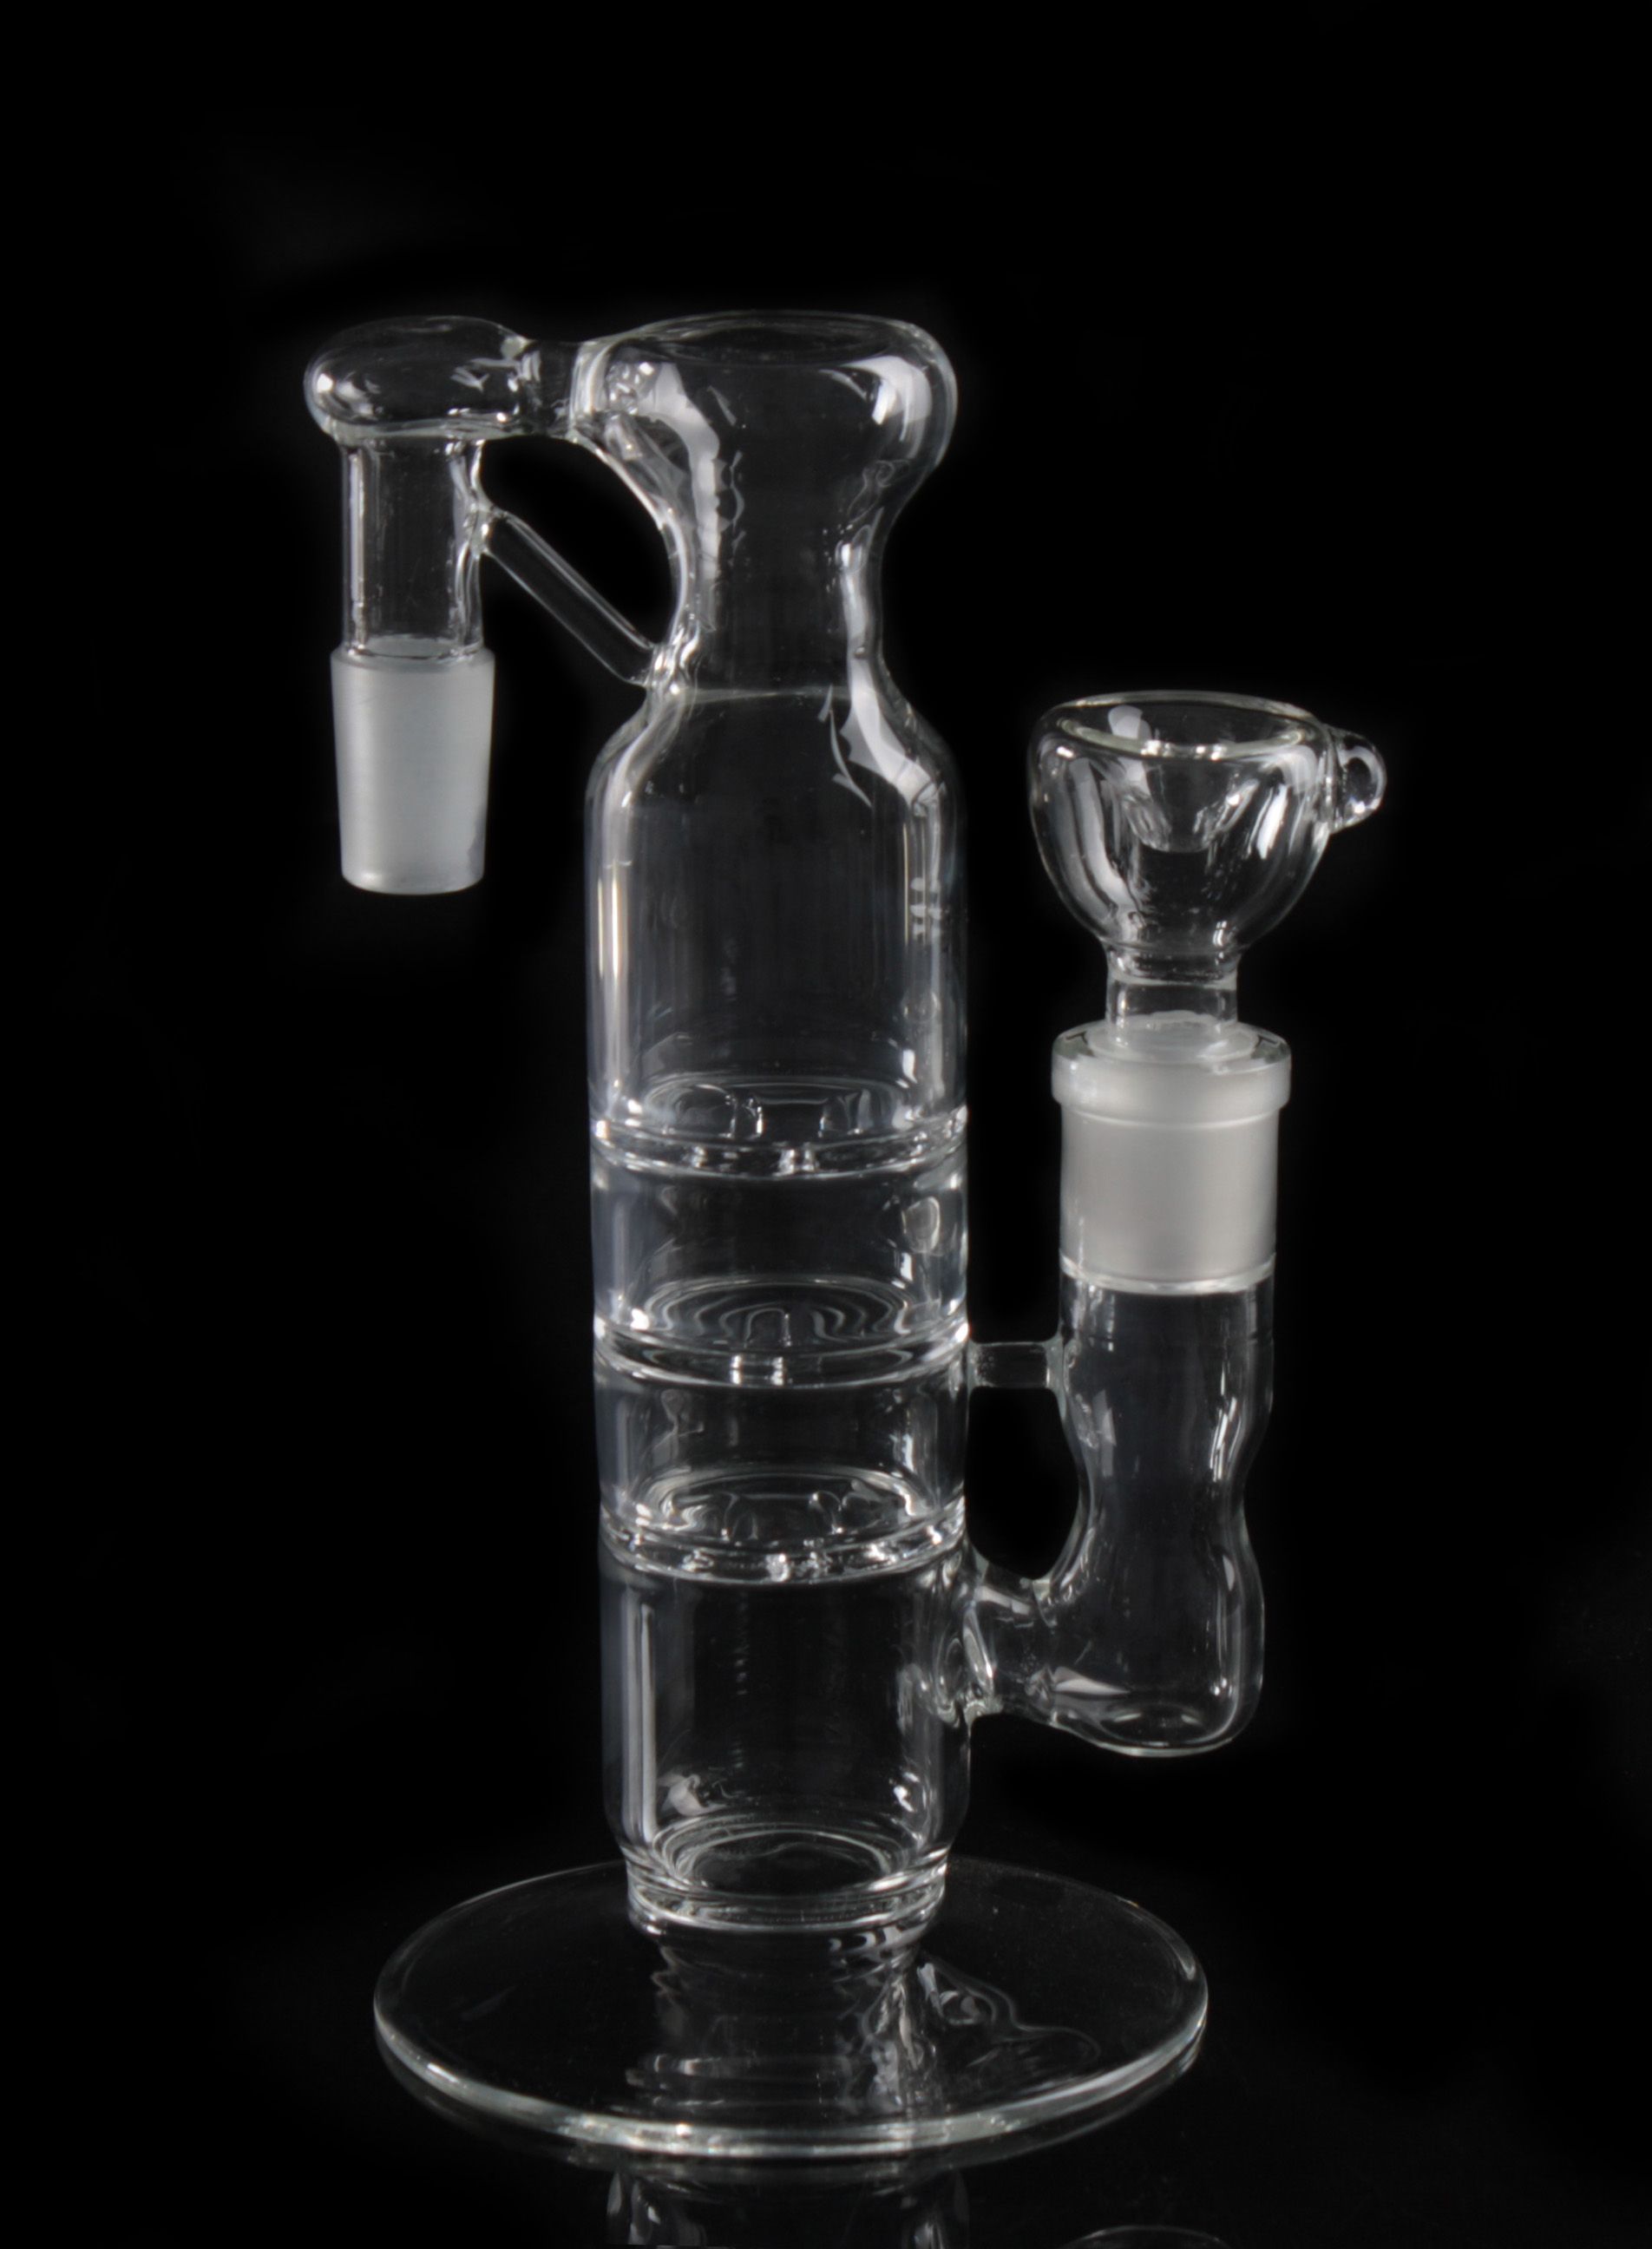 2014%20new%20Wholesale%20glass%20pipe%20with%20bong%20lighter%20glass%20water%20pipes%20smoking%20AA332.jpg